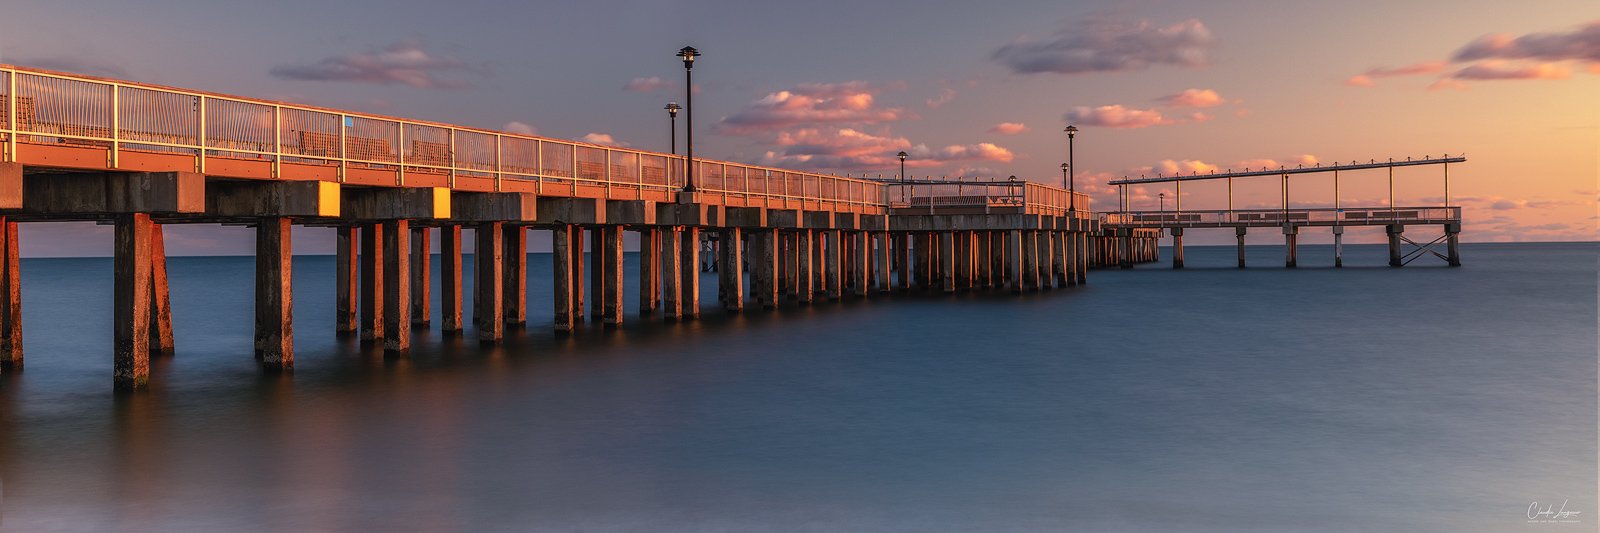 View of Steeplechase Pier at Brighton Beach in New York City at sunset.